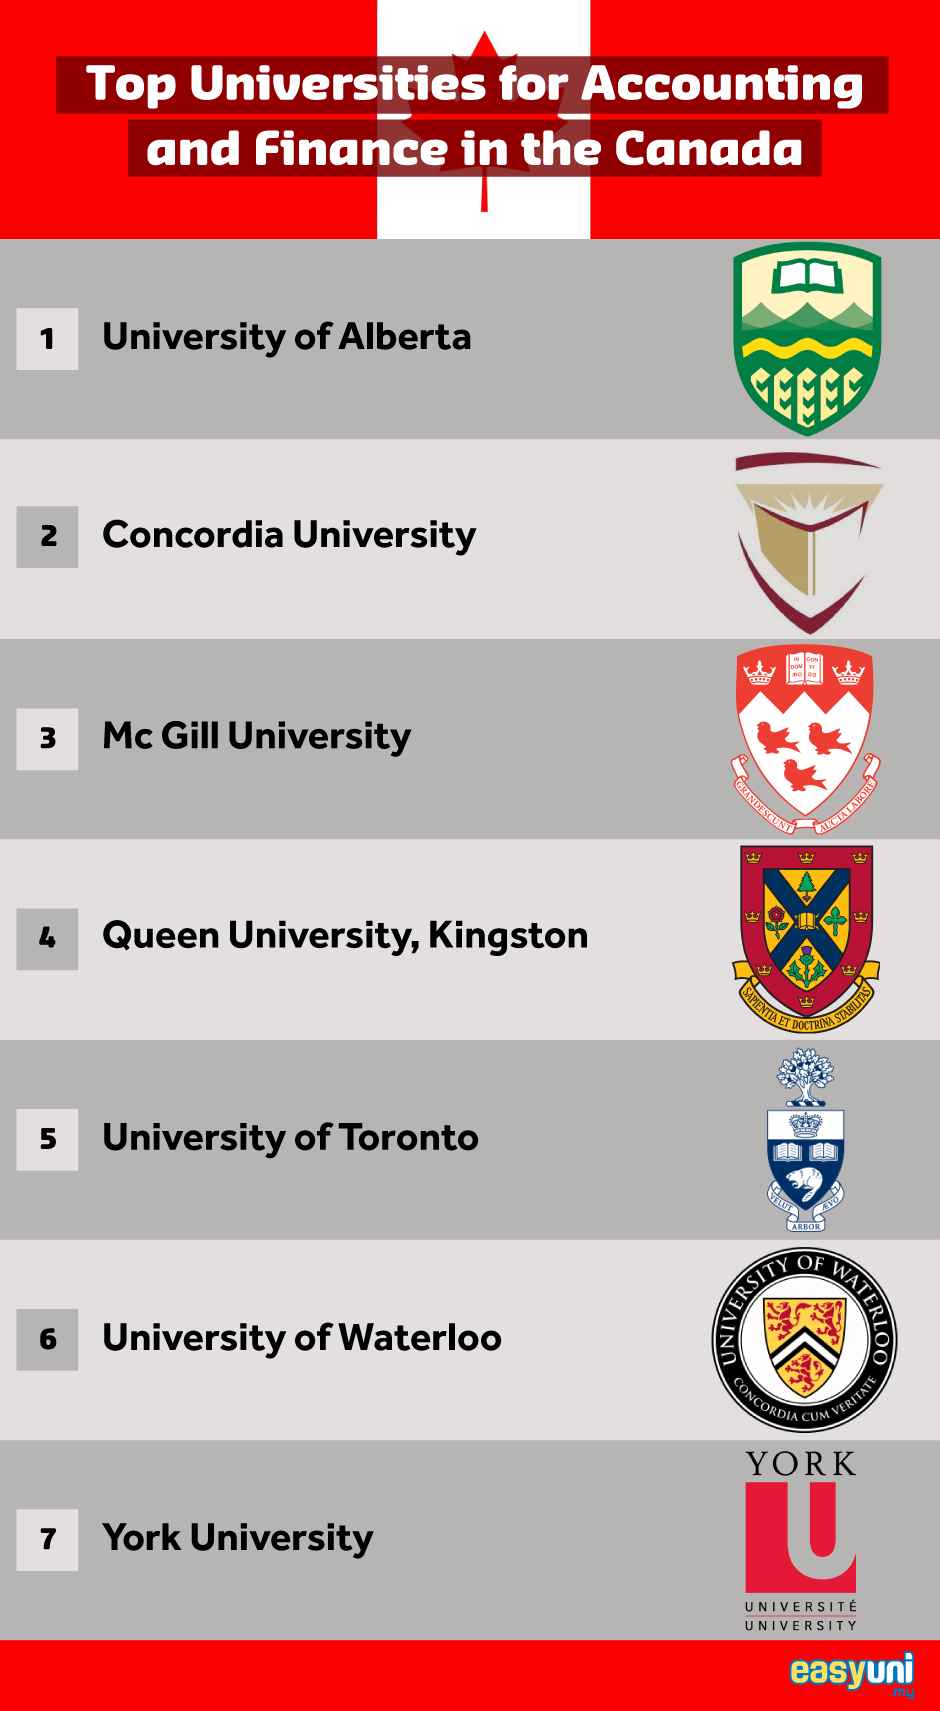 Top University for Accounting and Finance in Canada